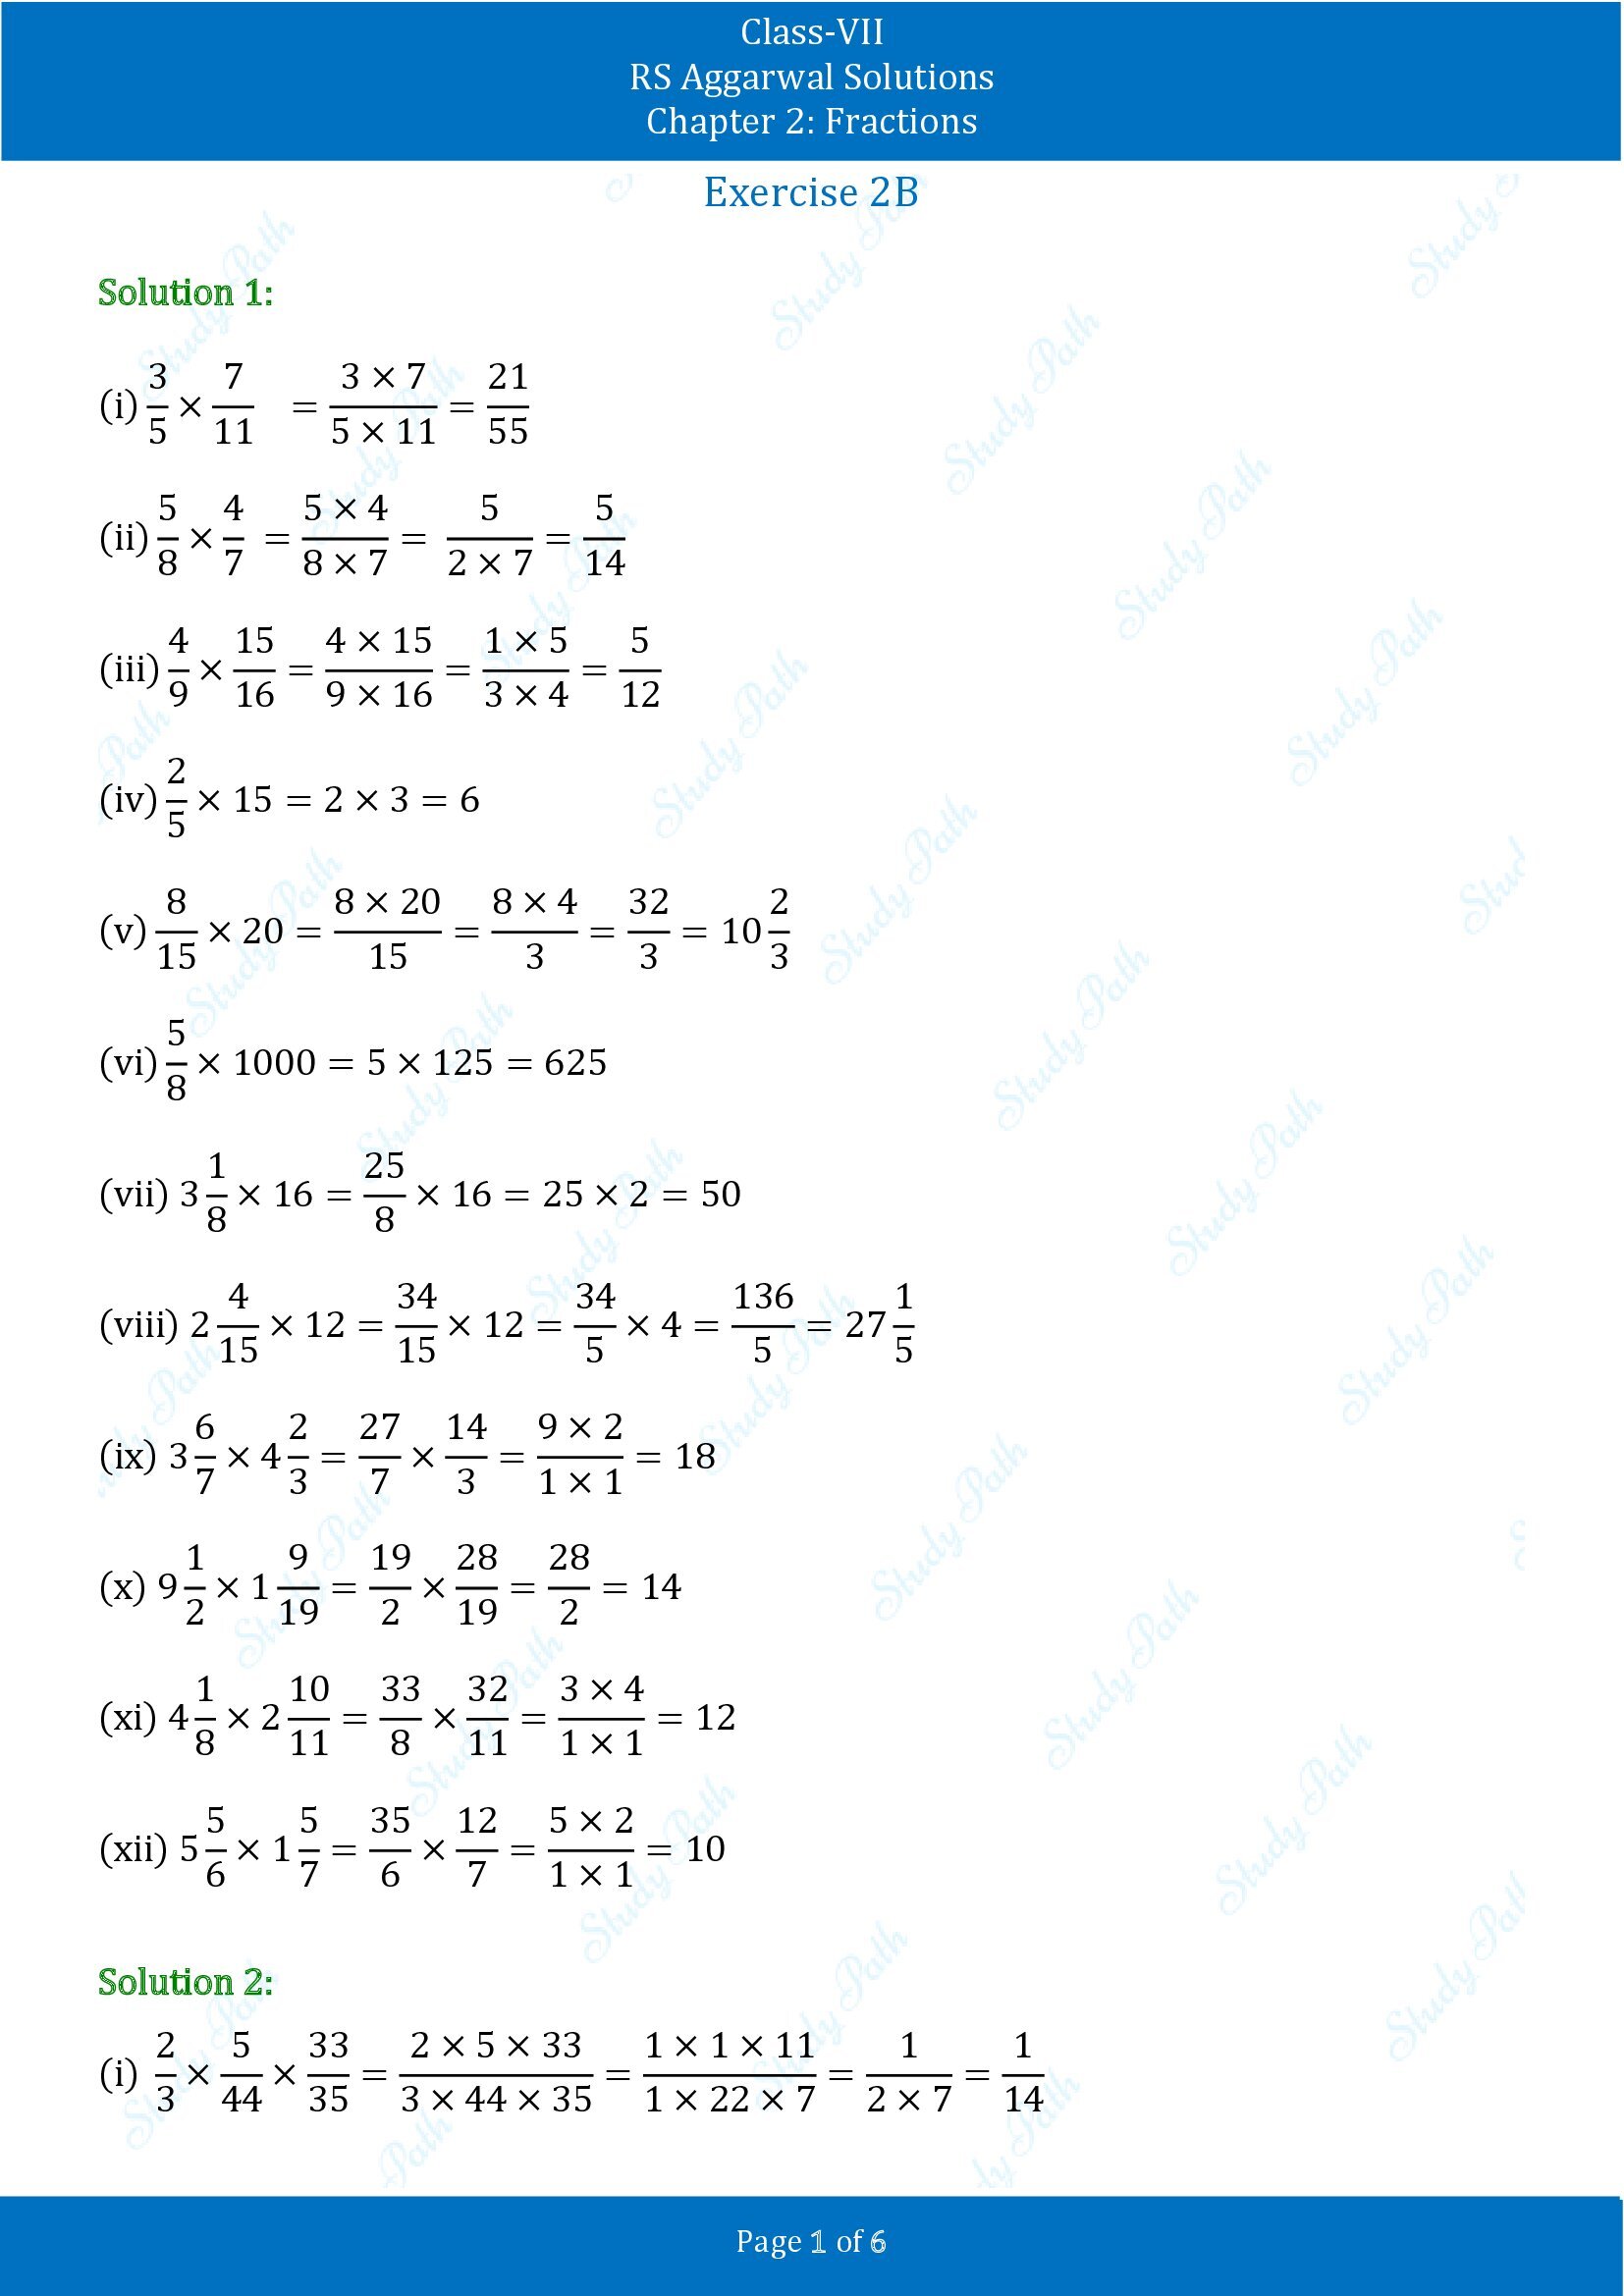 RS Aggarwal Solutions Class 7 Chapter 2 Fractions Exercise 2B 00001